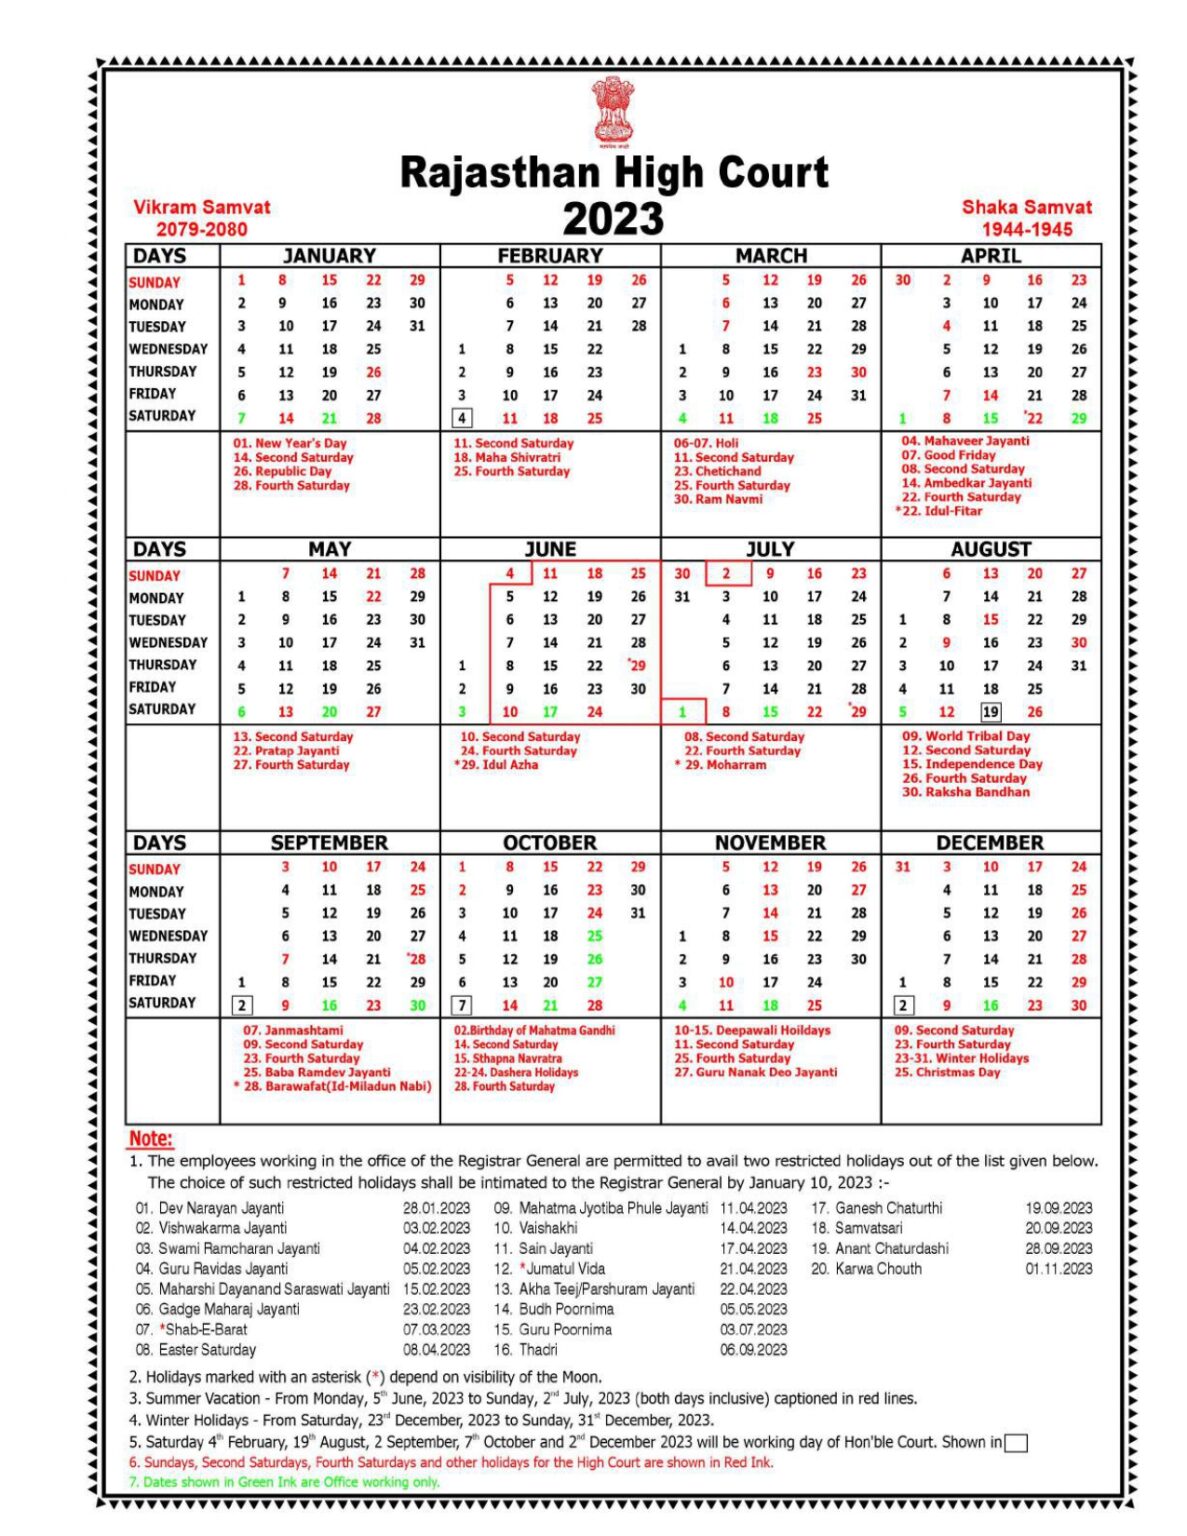 rajasthan-high-court-holiday-2023-2023